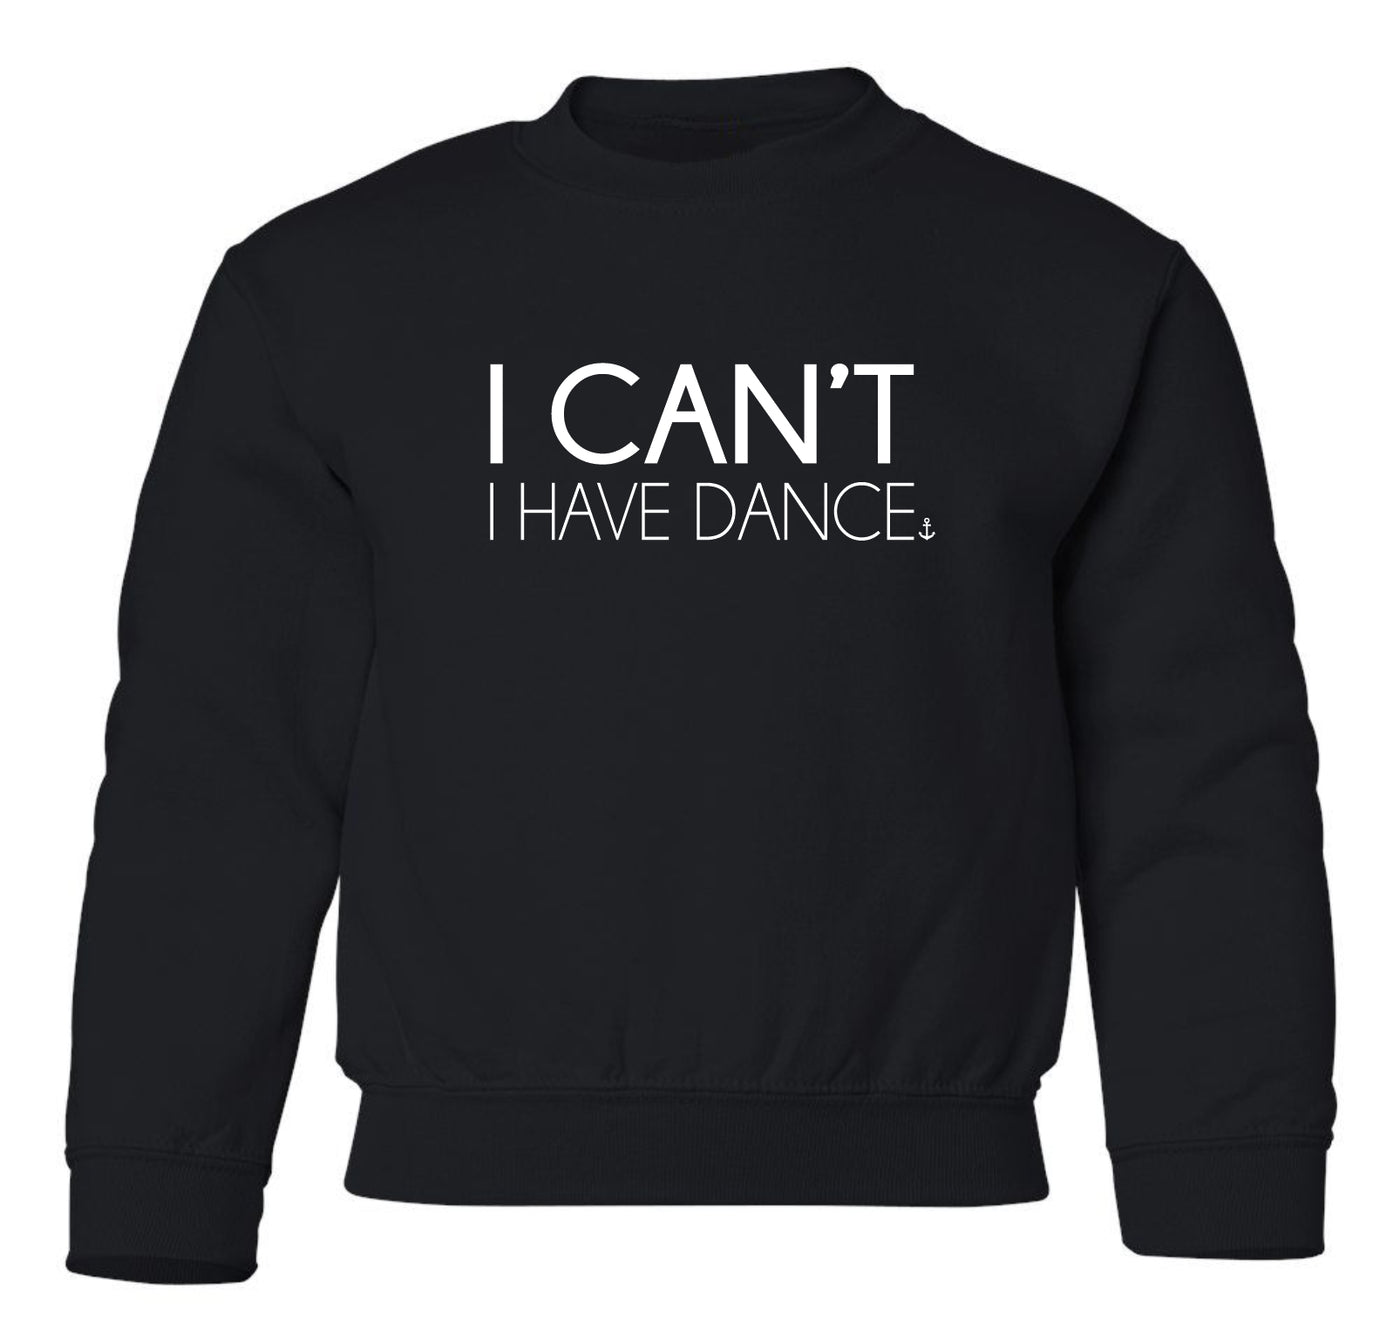 "I Can't. I Have Dance." Toddler/Youth Crewneck Sweatshirt